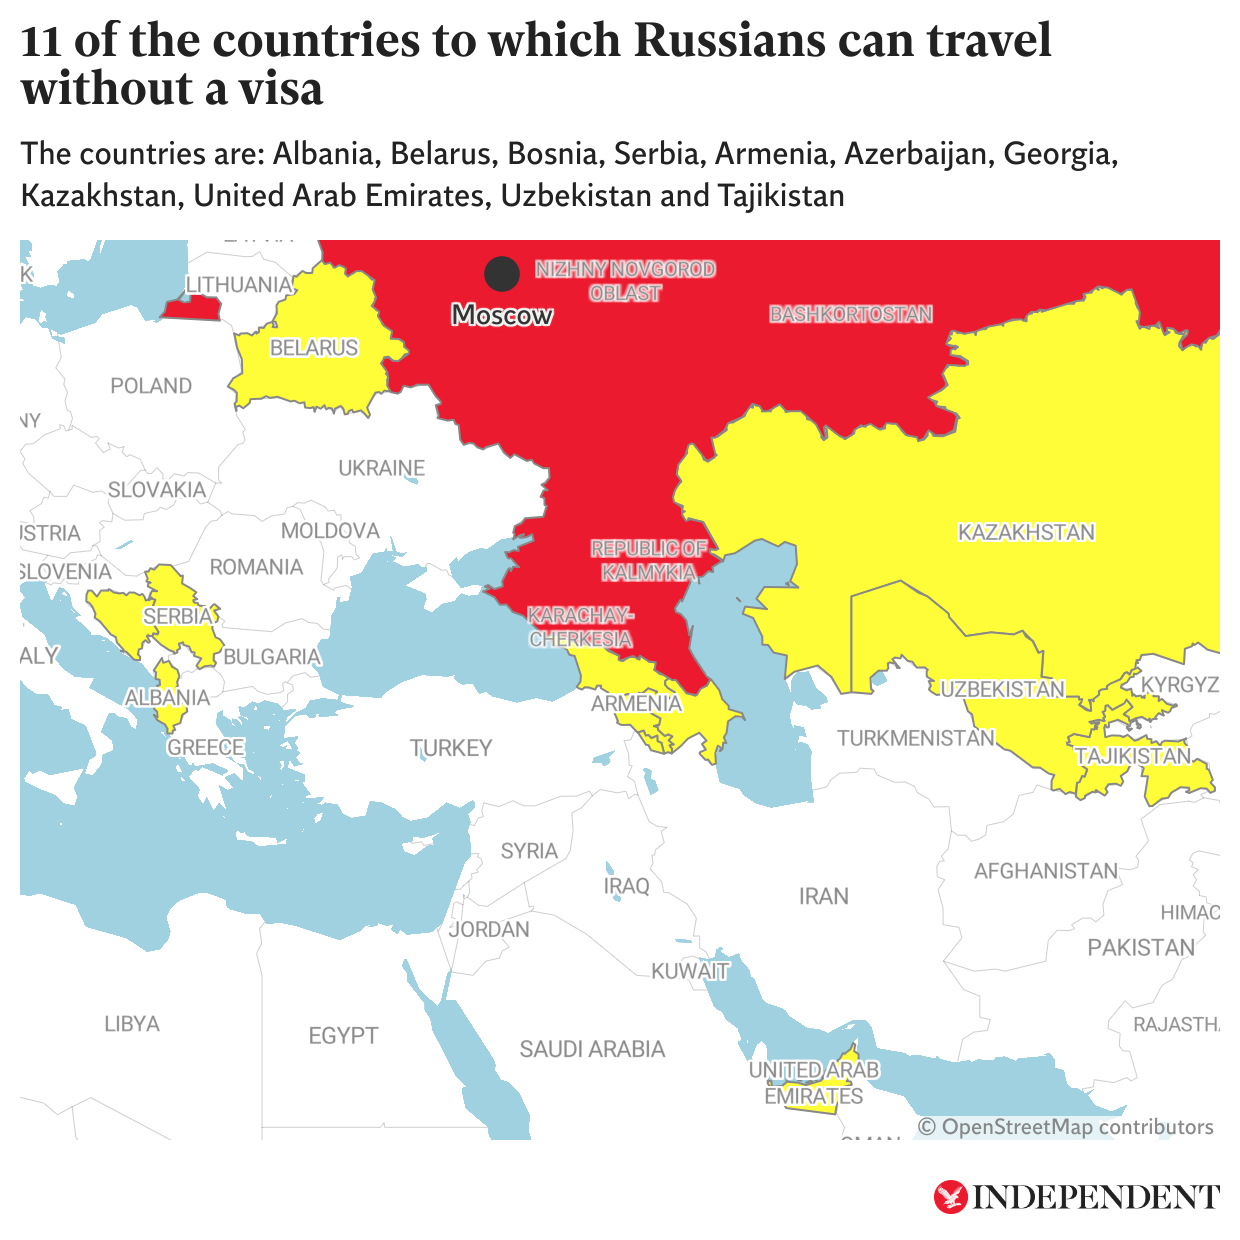 A selection of countries, highlighted in yellow, to which Russians can travel without a visa